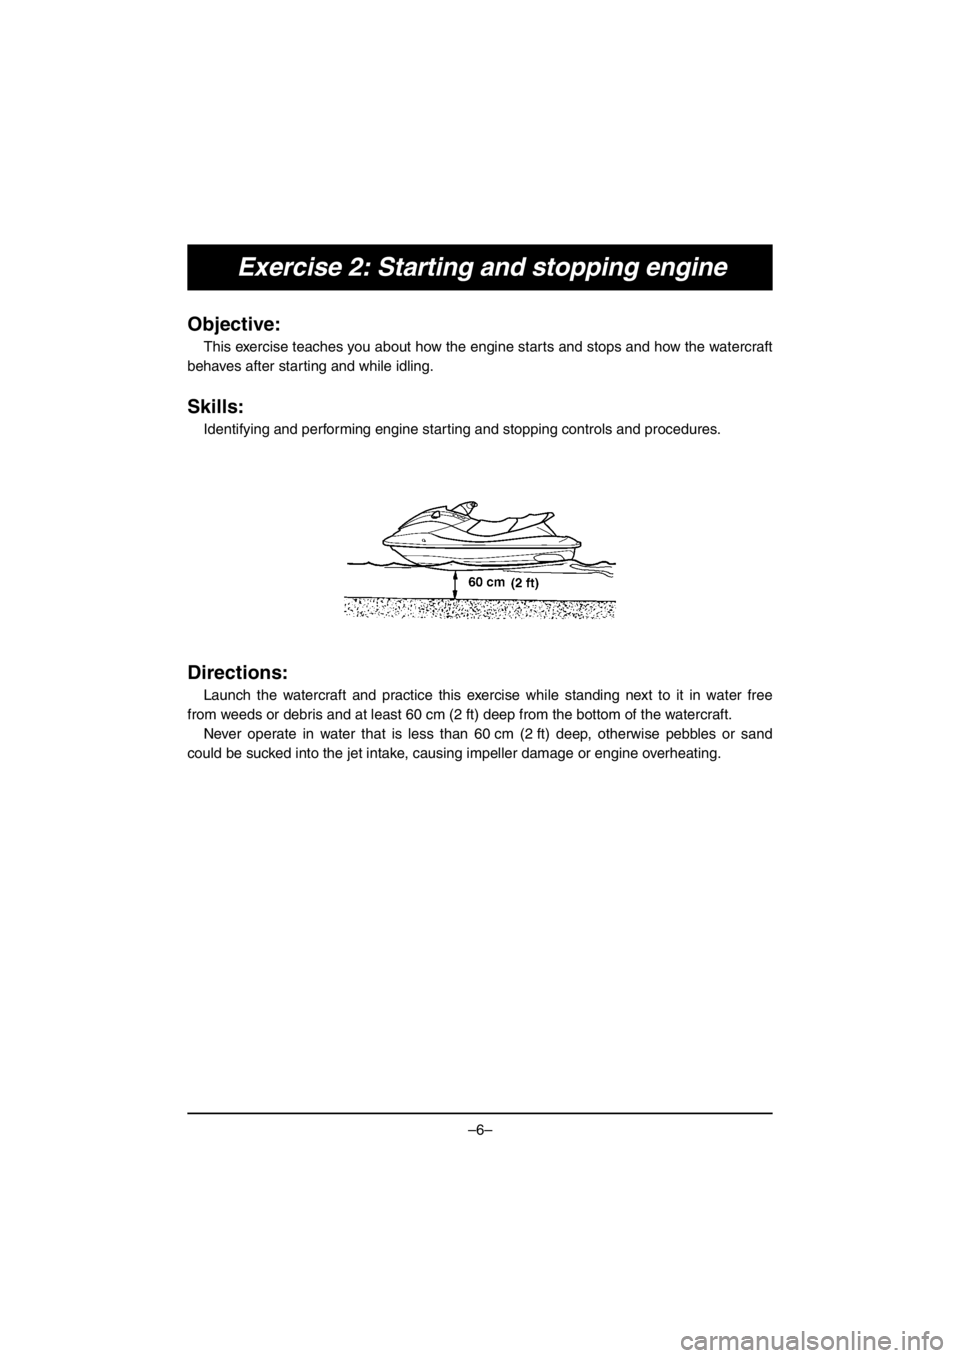 YAMAHA V1 2016  Notices Demploi (in French) –6–
Exercise 2: Starting and stopping engine
Objective:
This exercise teaches you about how the engine starts and stops and how the watercraft
behaves after starting and while idling.
Skills:
Iden